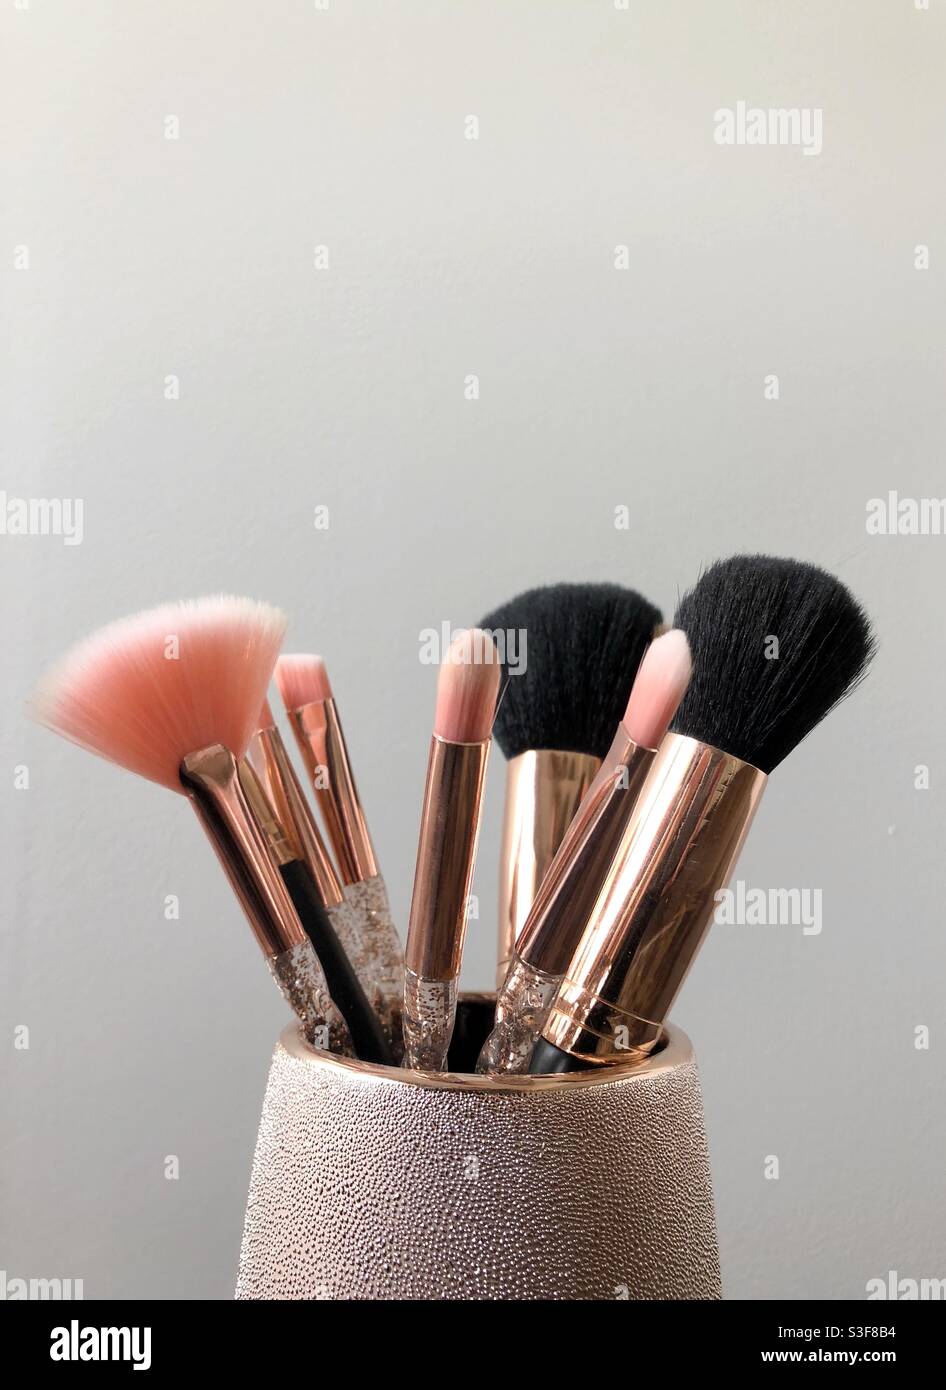 Makeup brushes in a shiny jar Stock Photo